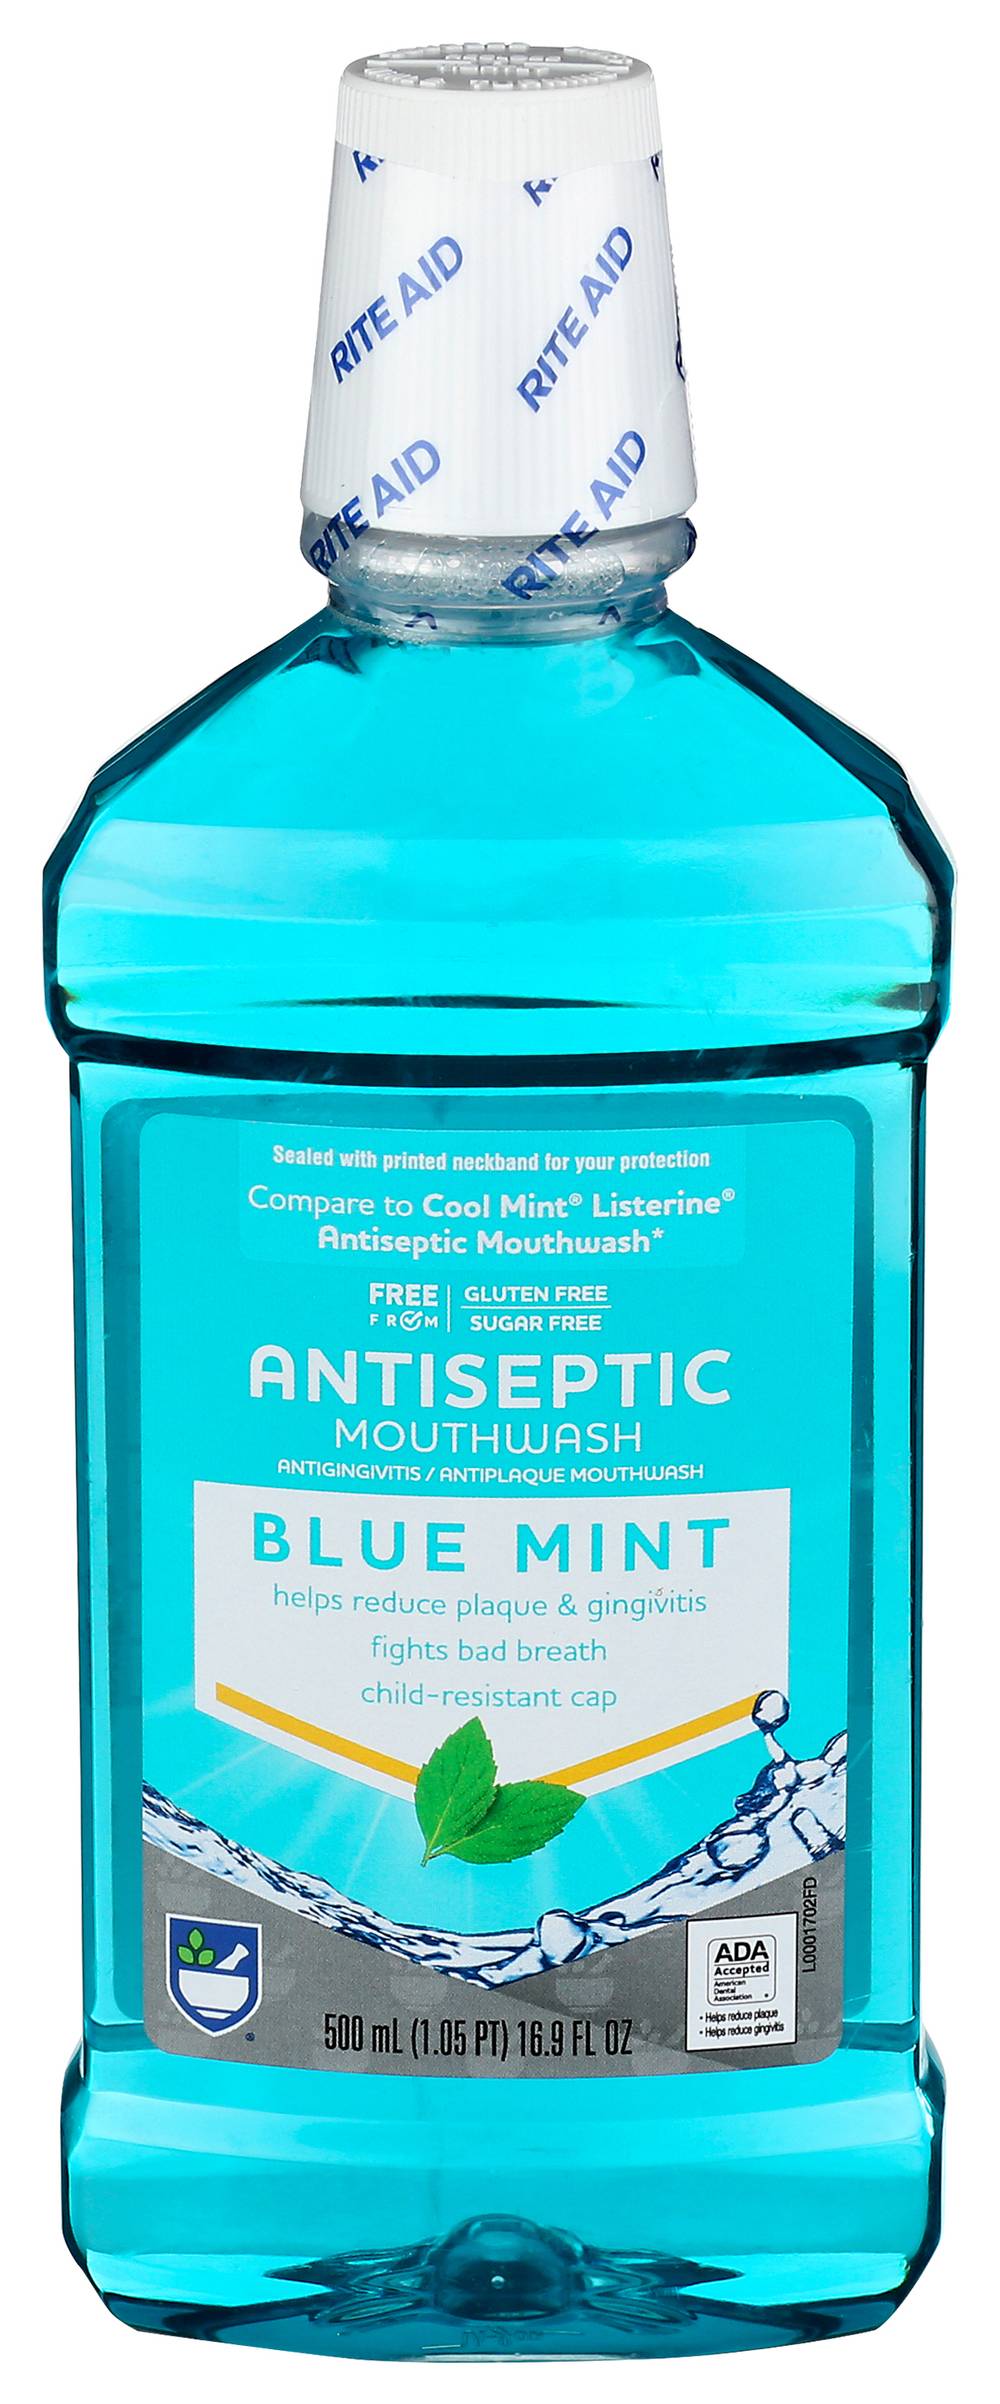 Rite Aid Oral Care Antiseptic Mouth Rinse Blue Mint (16.9 oz)